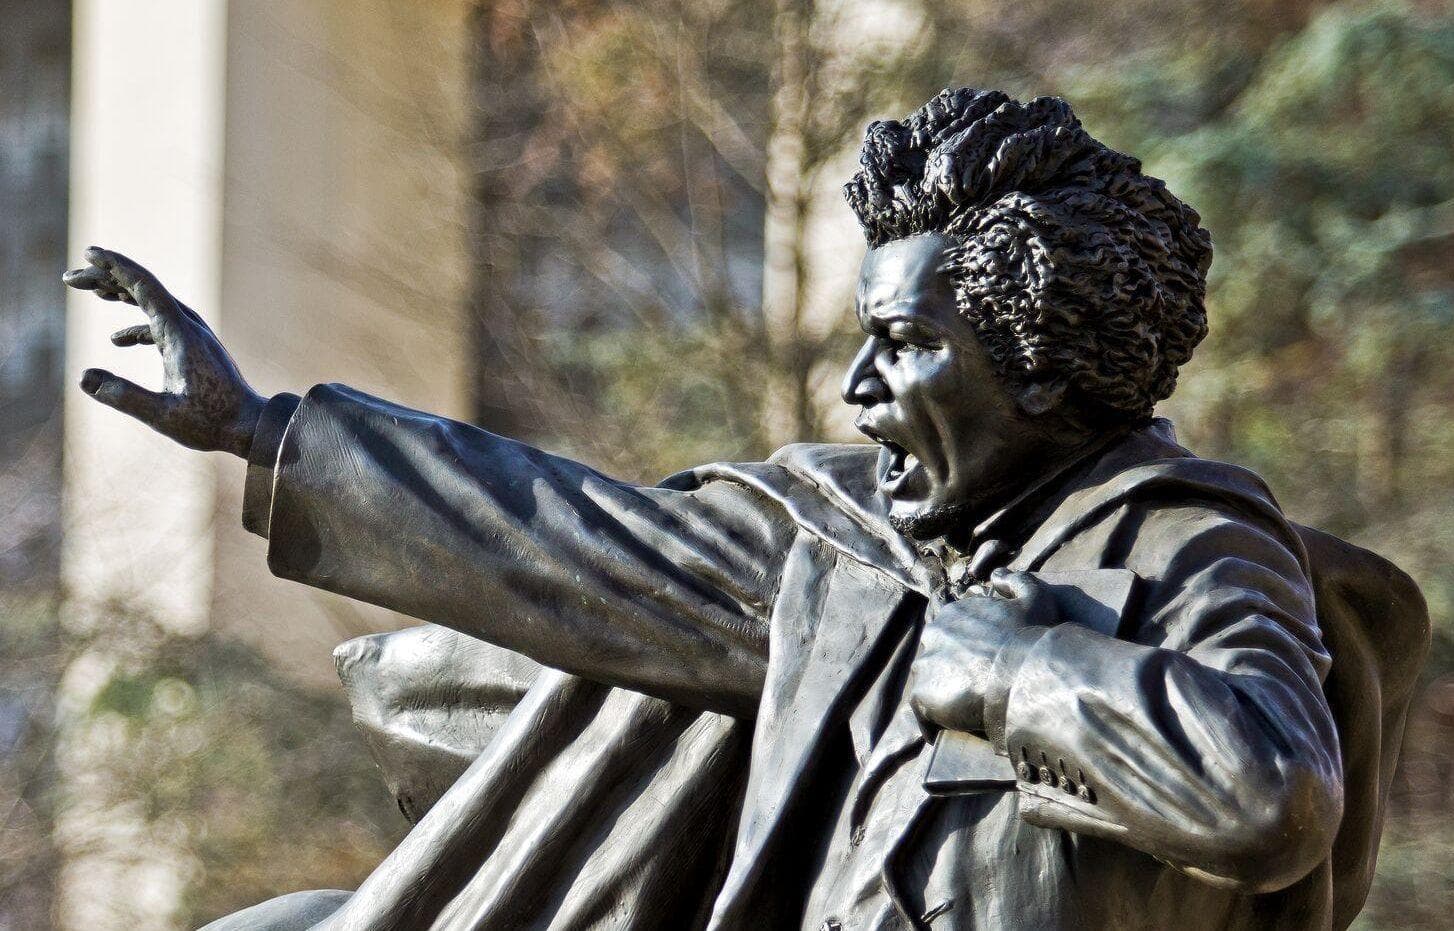 Weathered bronze statue of abolitionist, social reformer and statesman, Frederick Douglass. His right arm raised while delivering a powerful speech. His left arm holds tight a copy of his autobiography.